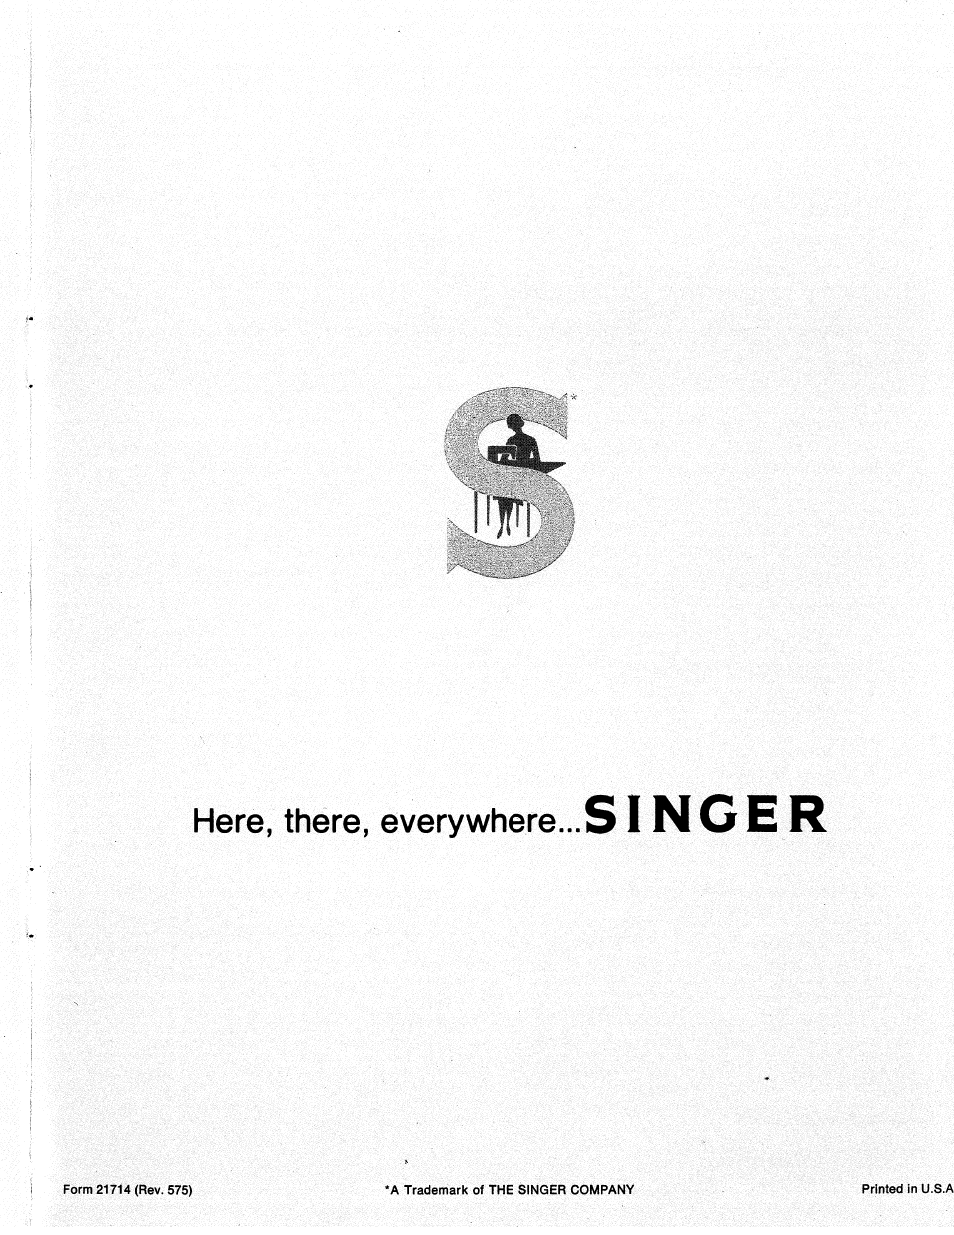 Singer, Here, there, everywhere | SINGER 714 Graduate User Manual | Page 51 / 52